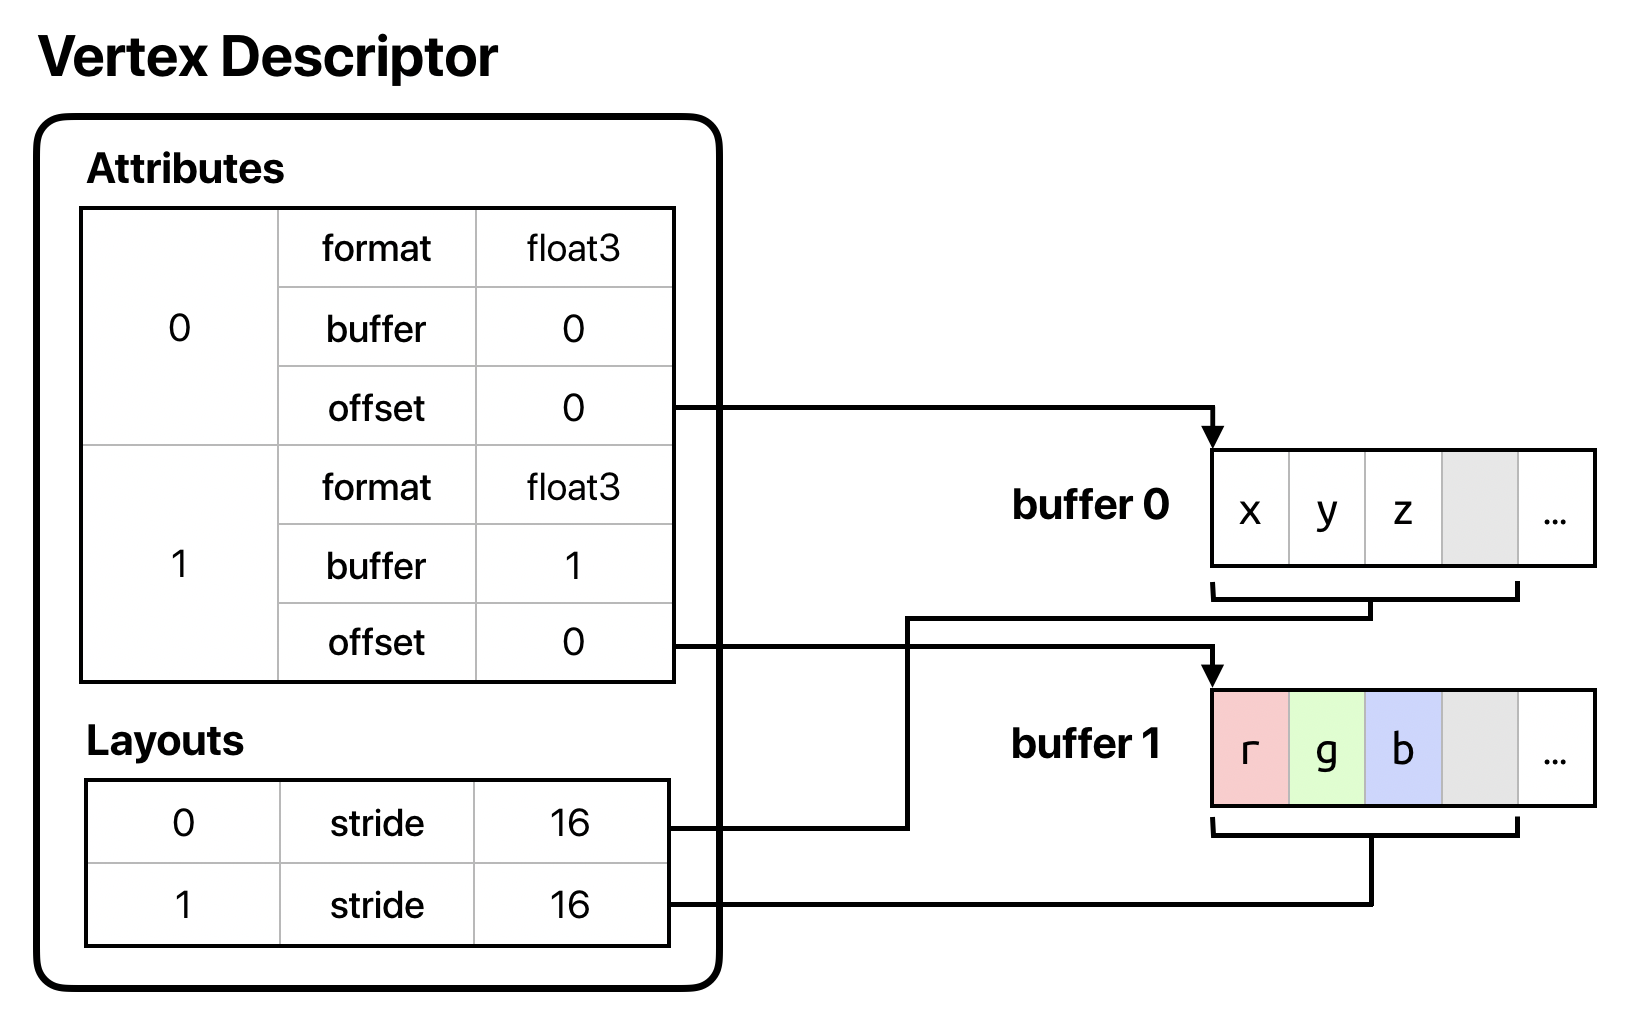 Figure illustrating non-interleaved attributes in different buffers